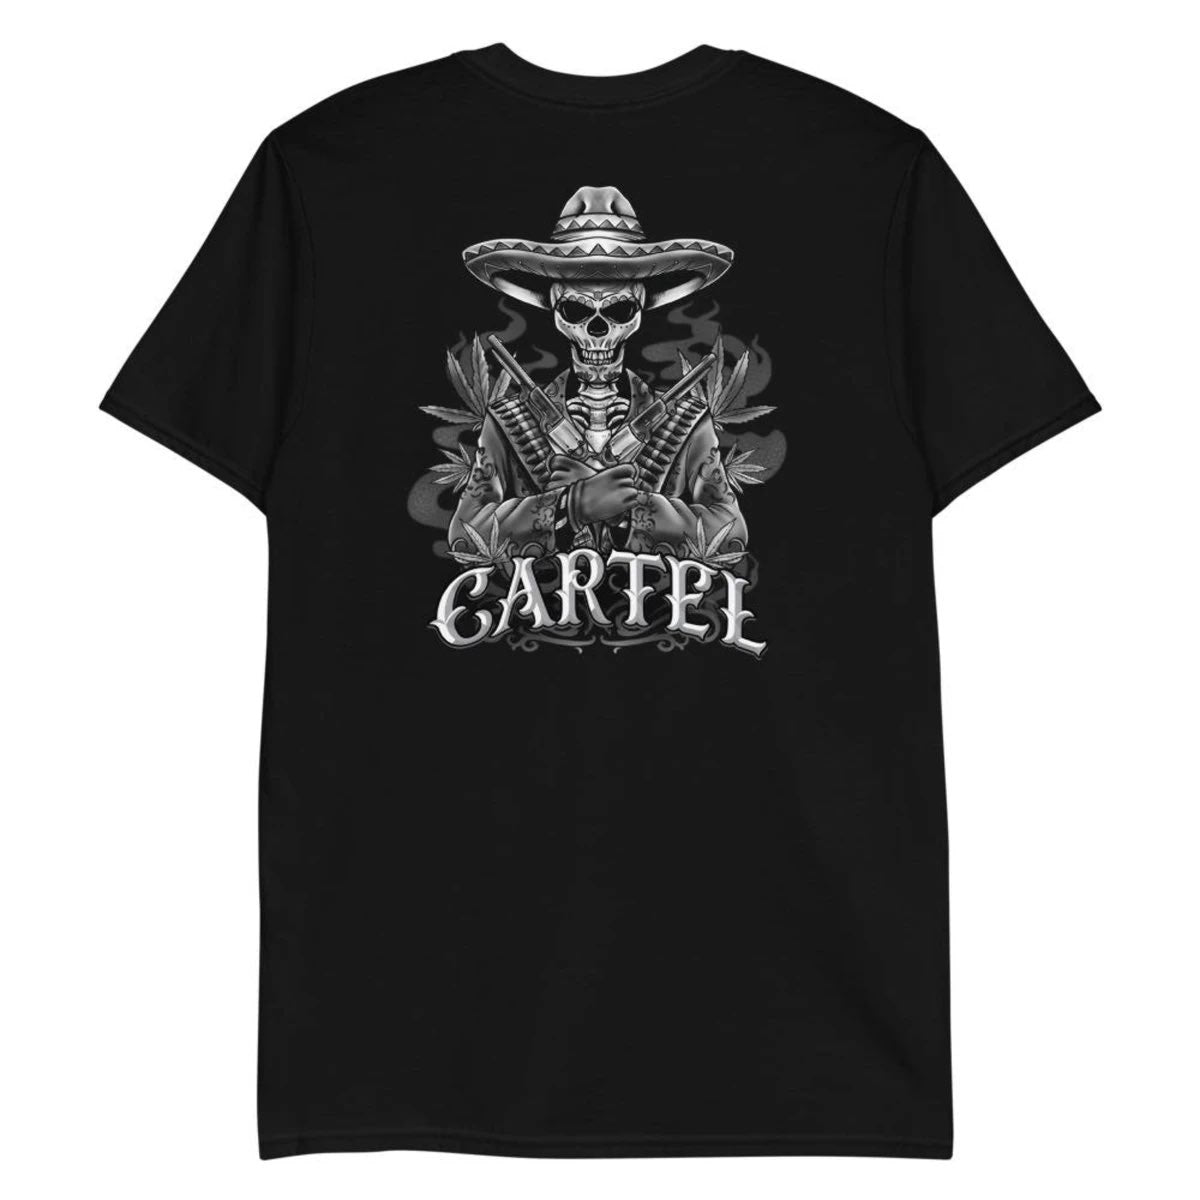 BackWoodz and Cartel Cannabis Merch and clothing